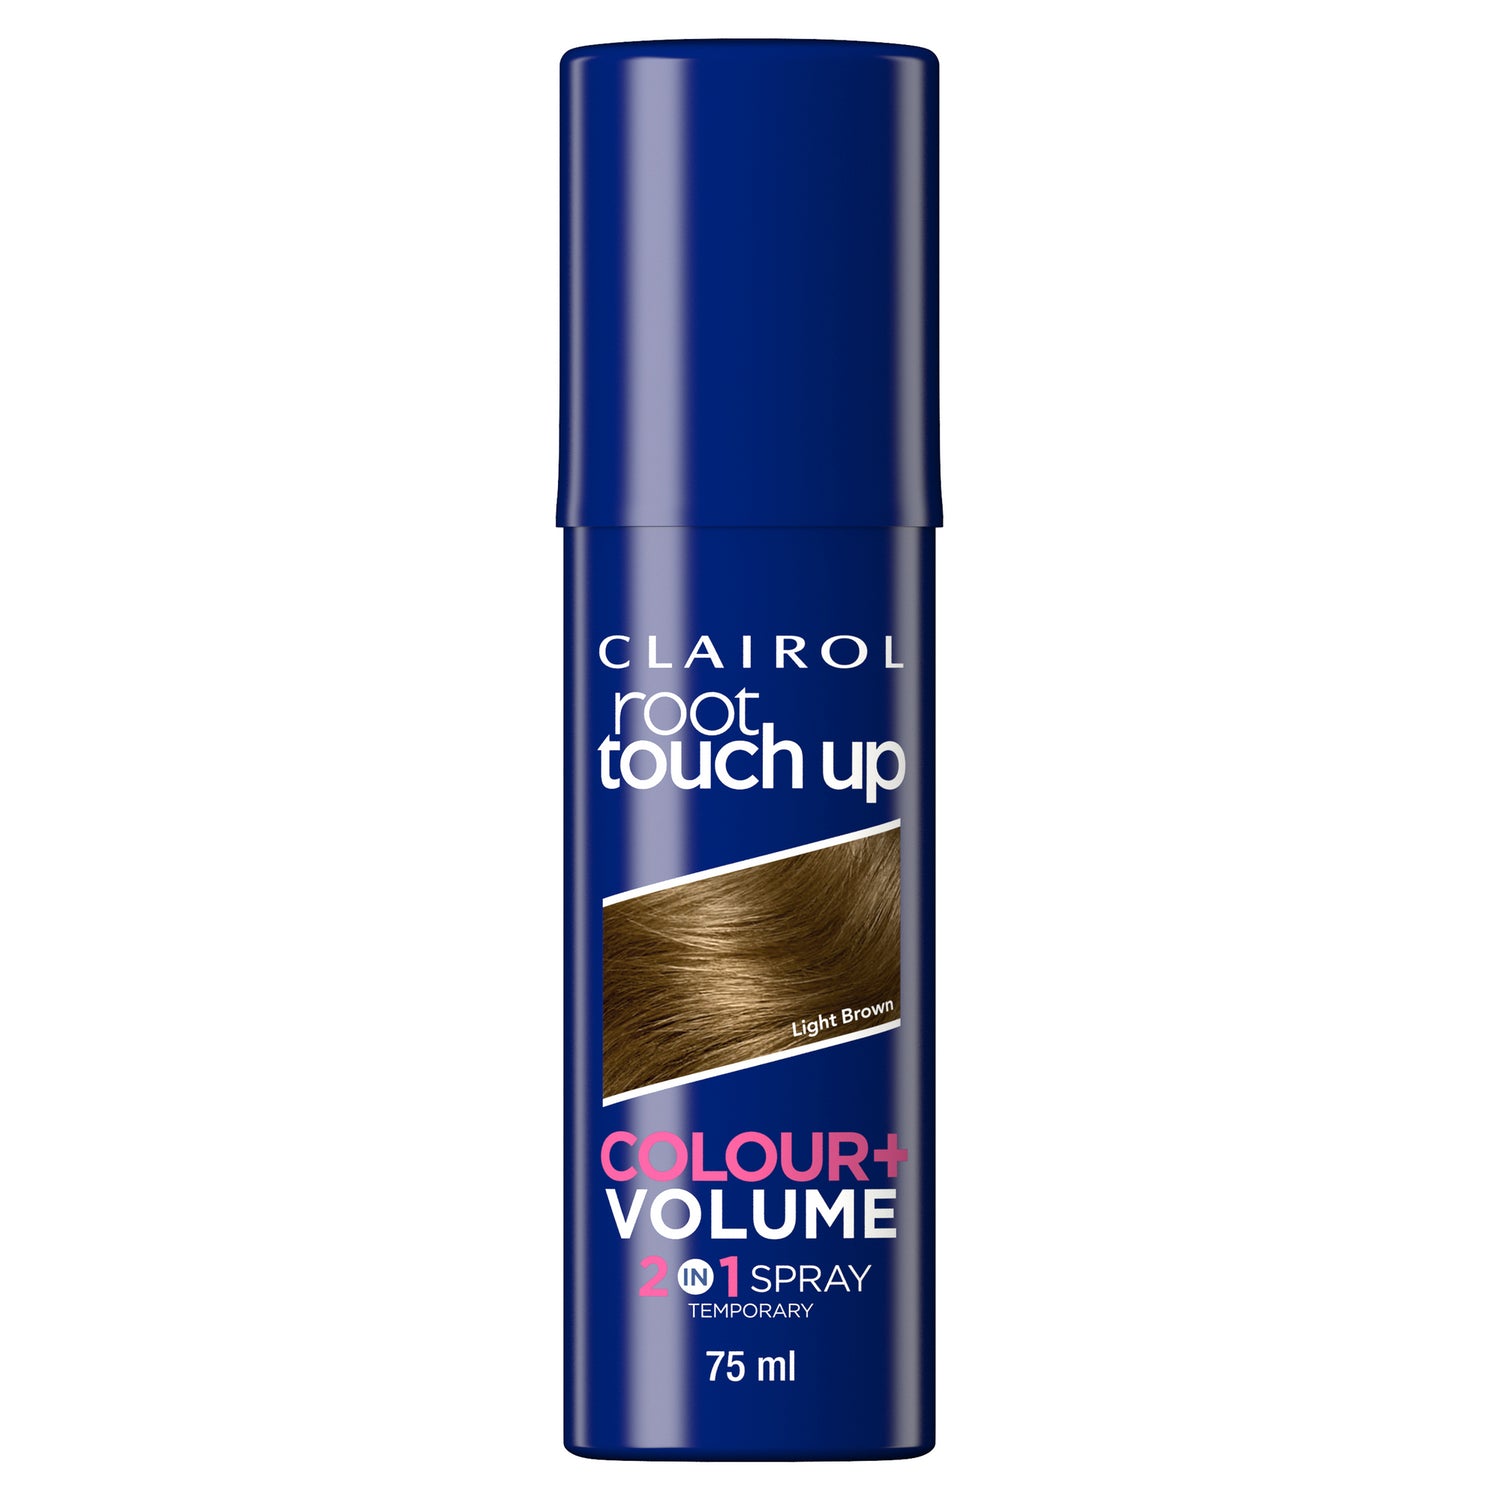 Clairol Root Touch Up Color + Volume 2 in 1 Spray 75ml Light Brown